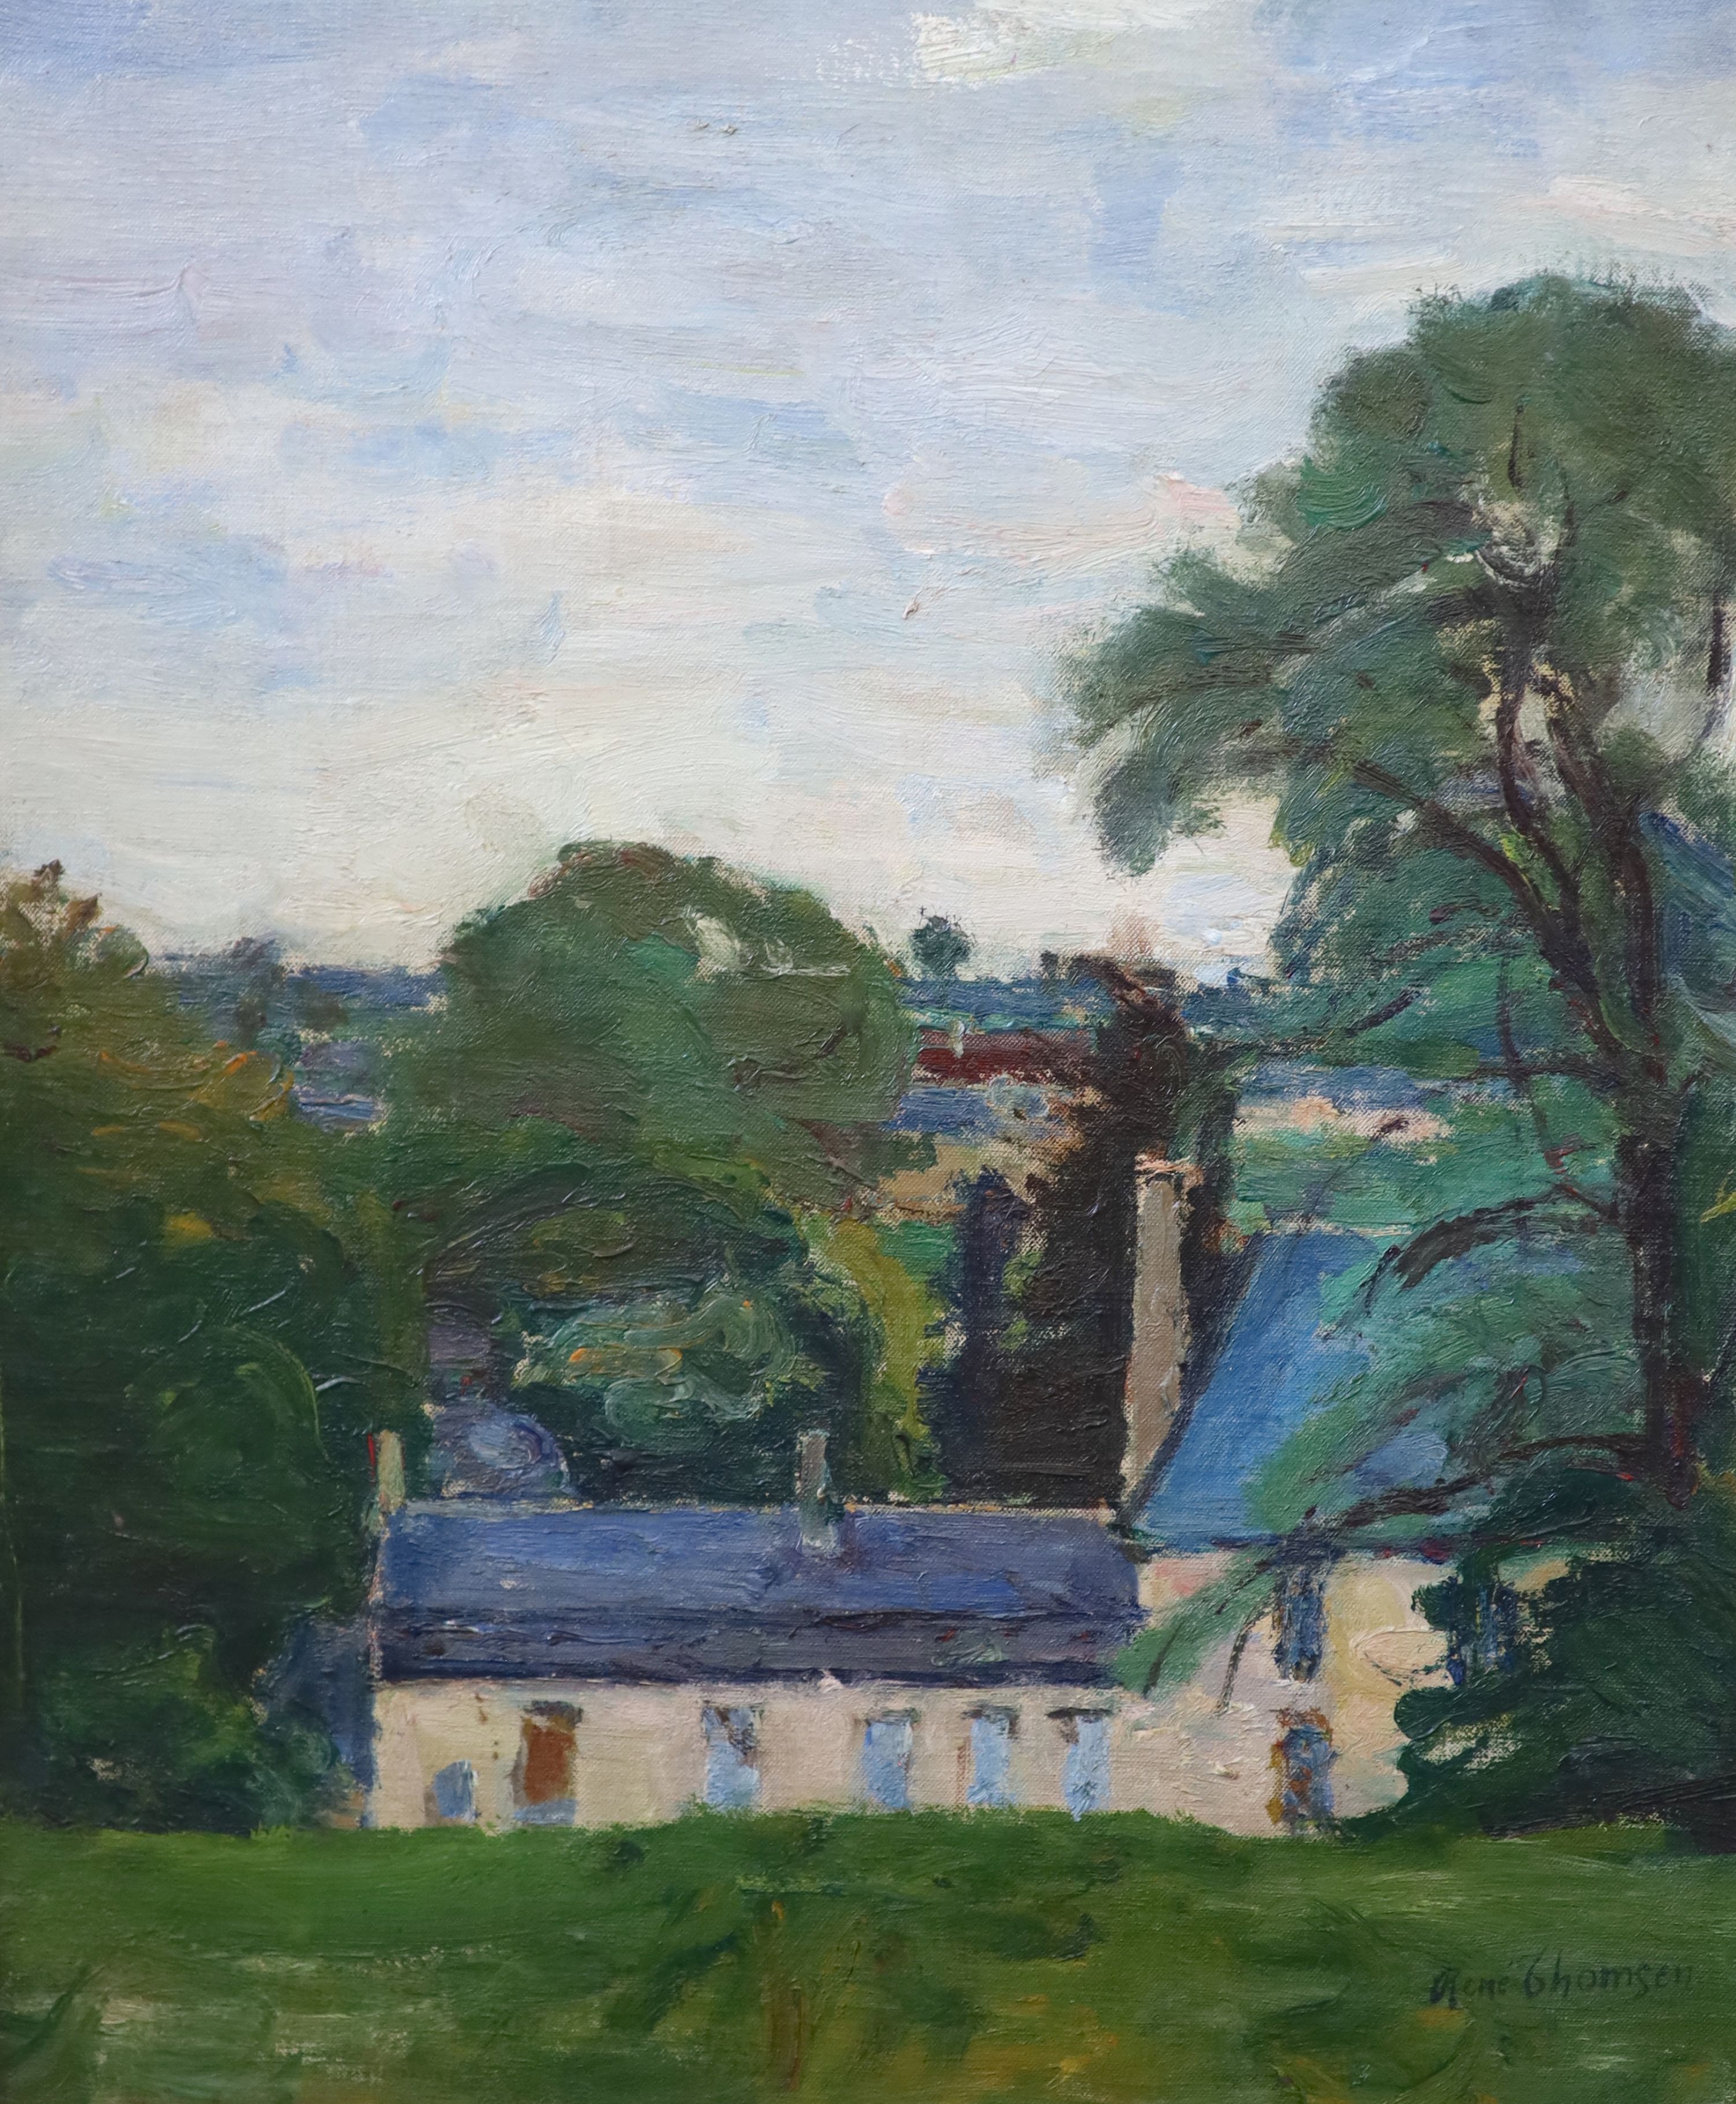 Rene Thomsen (French, 1897-1976), House and trees in a landscape, Oil on canvas, 54 x 45cm.